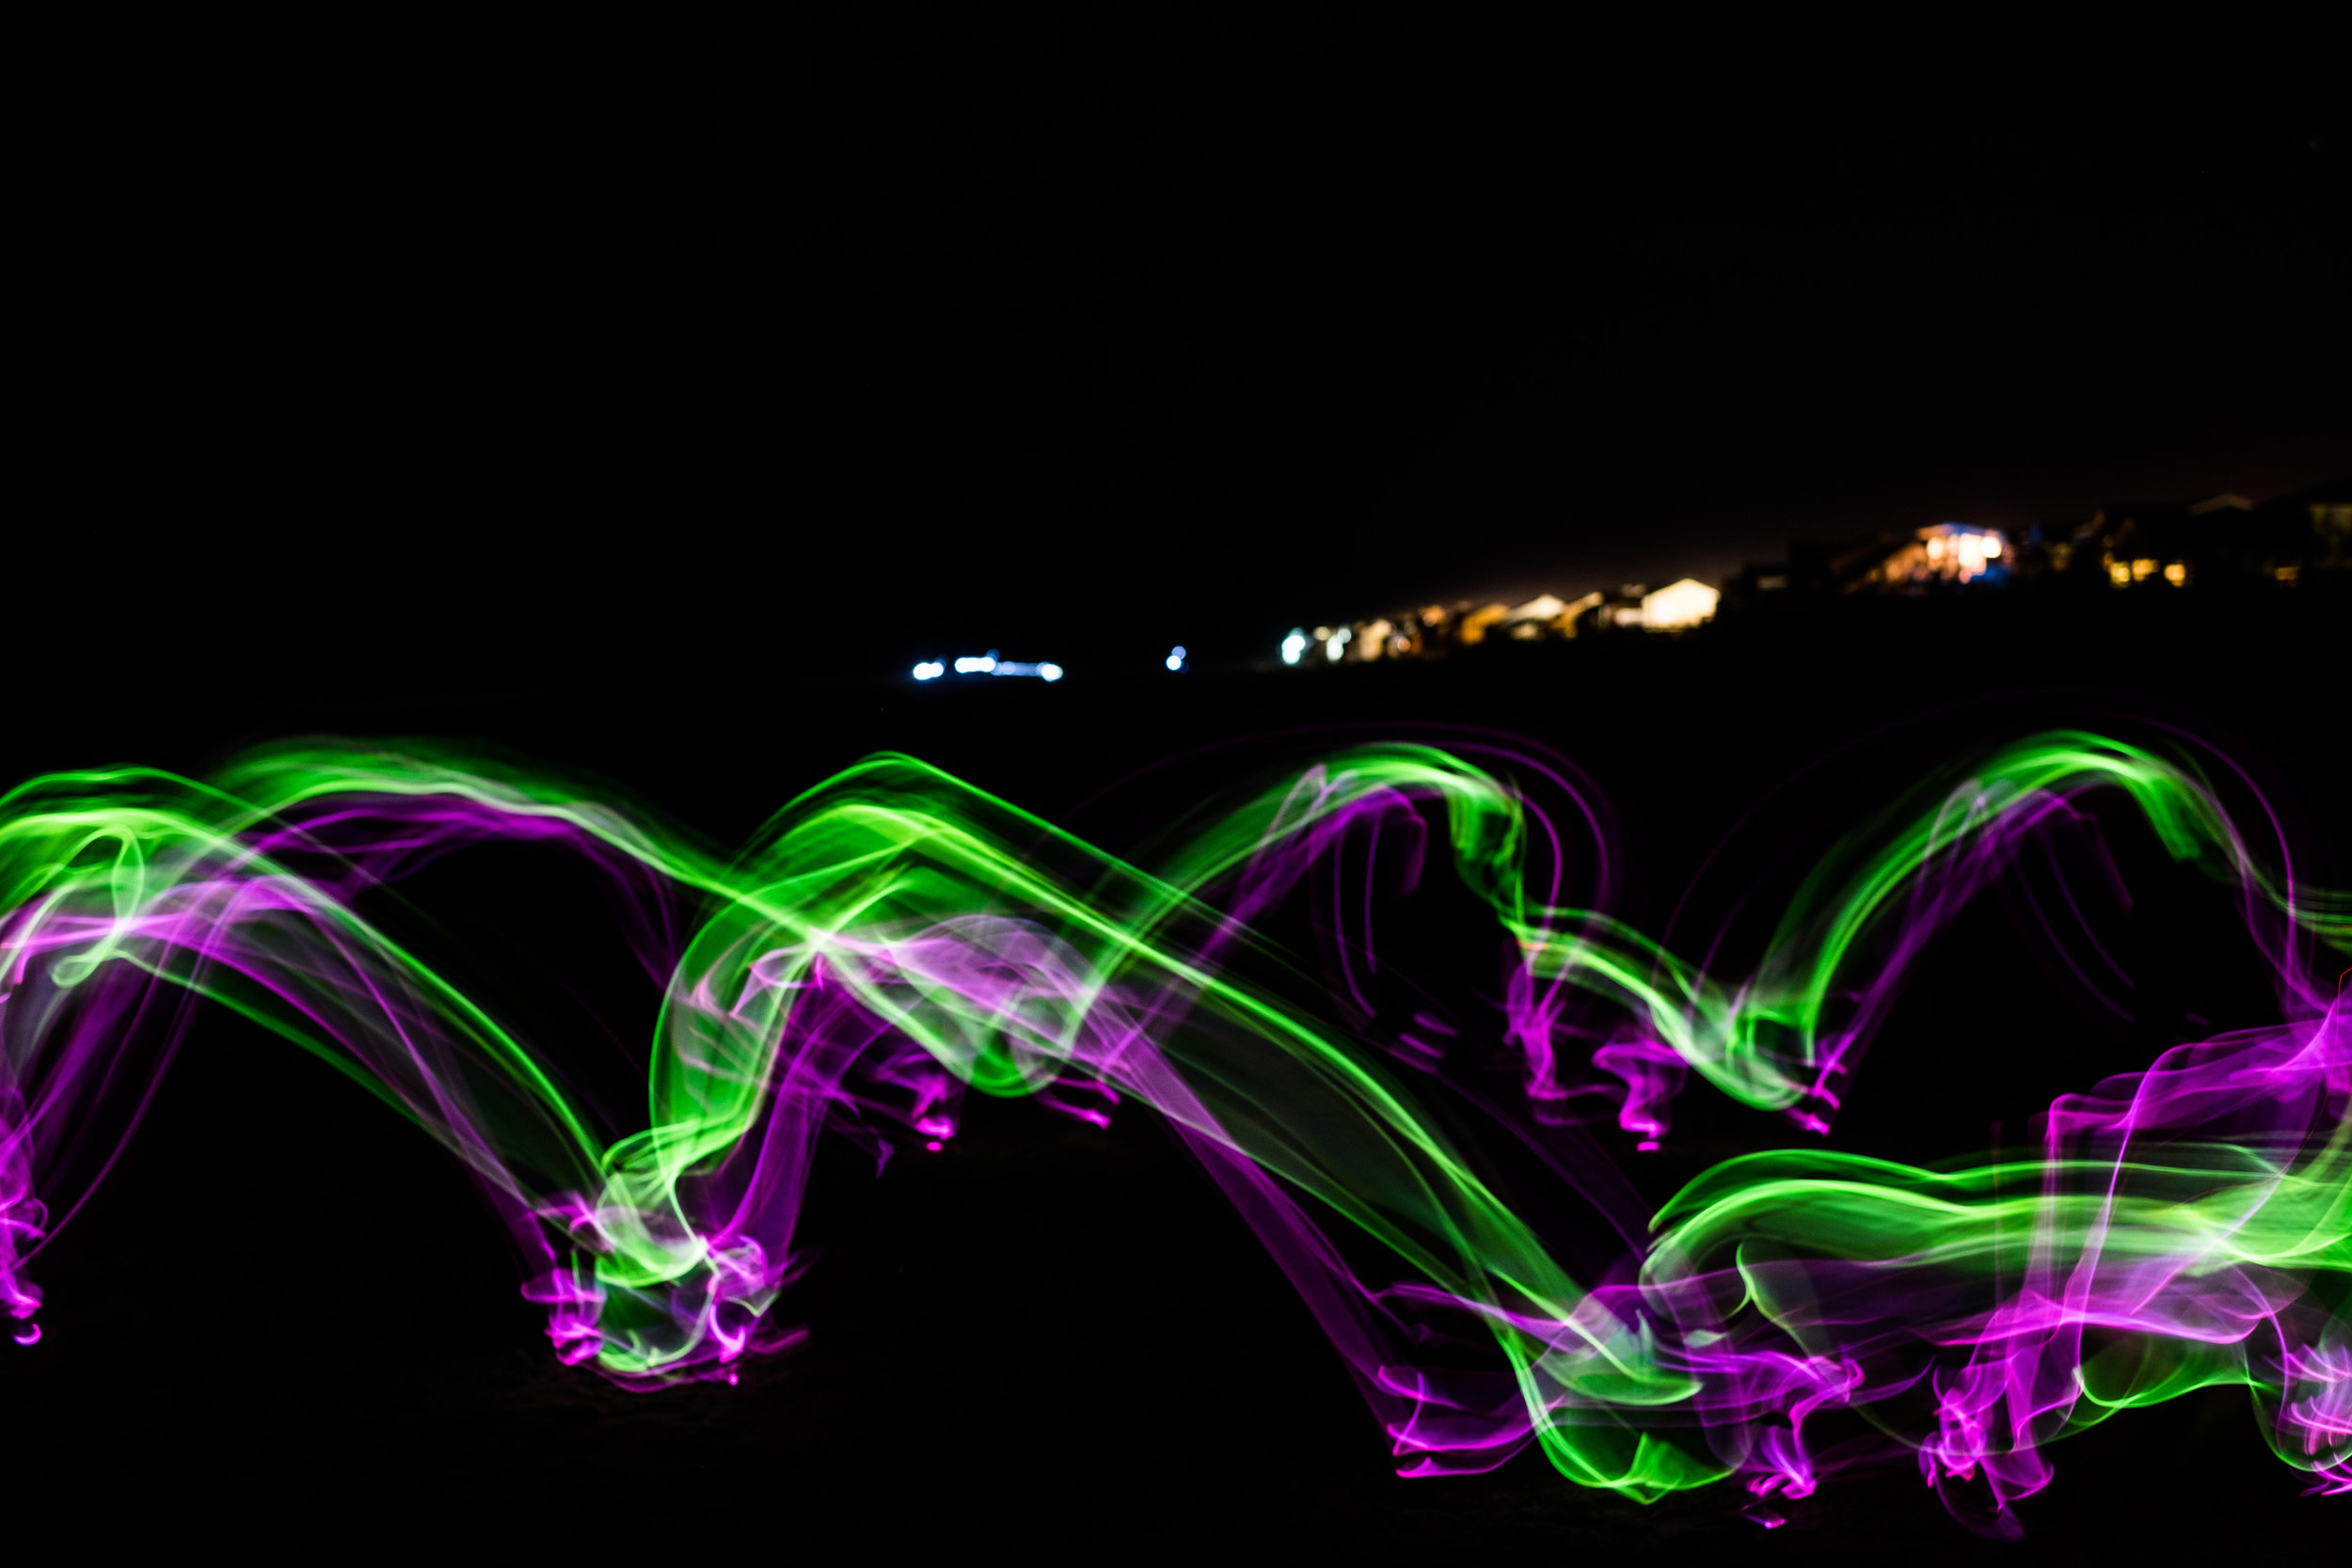 T's light trails resulting from cartwheels